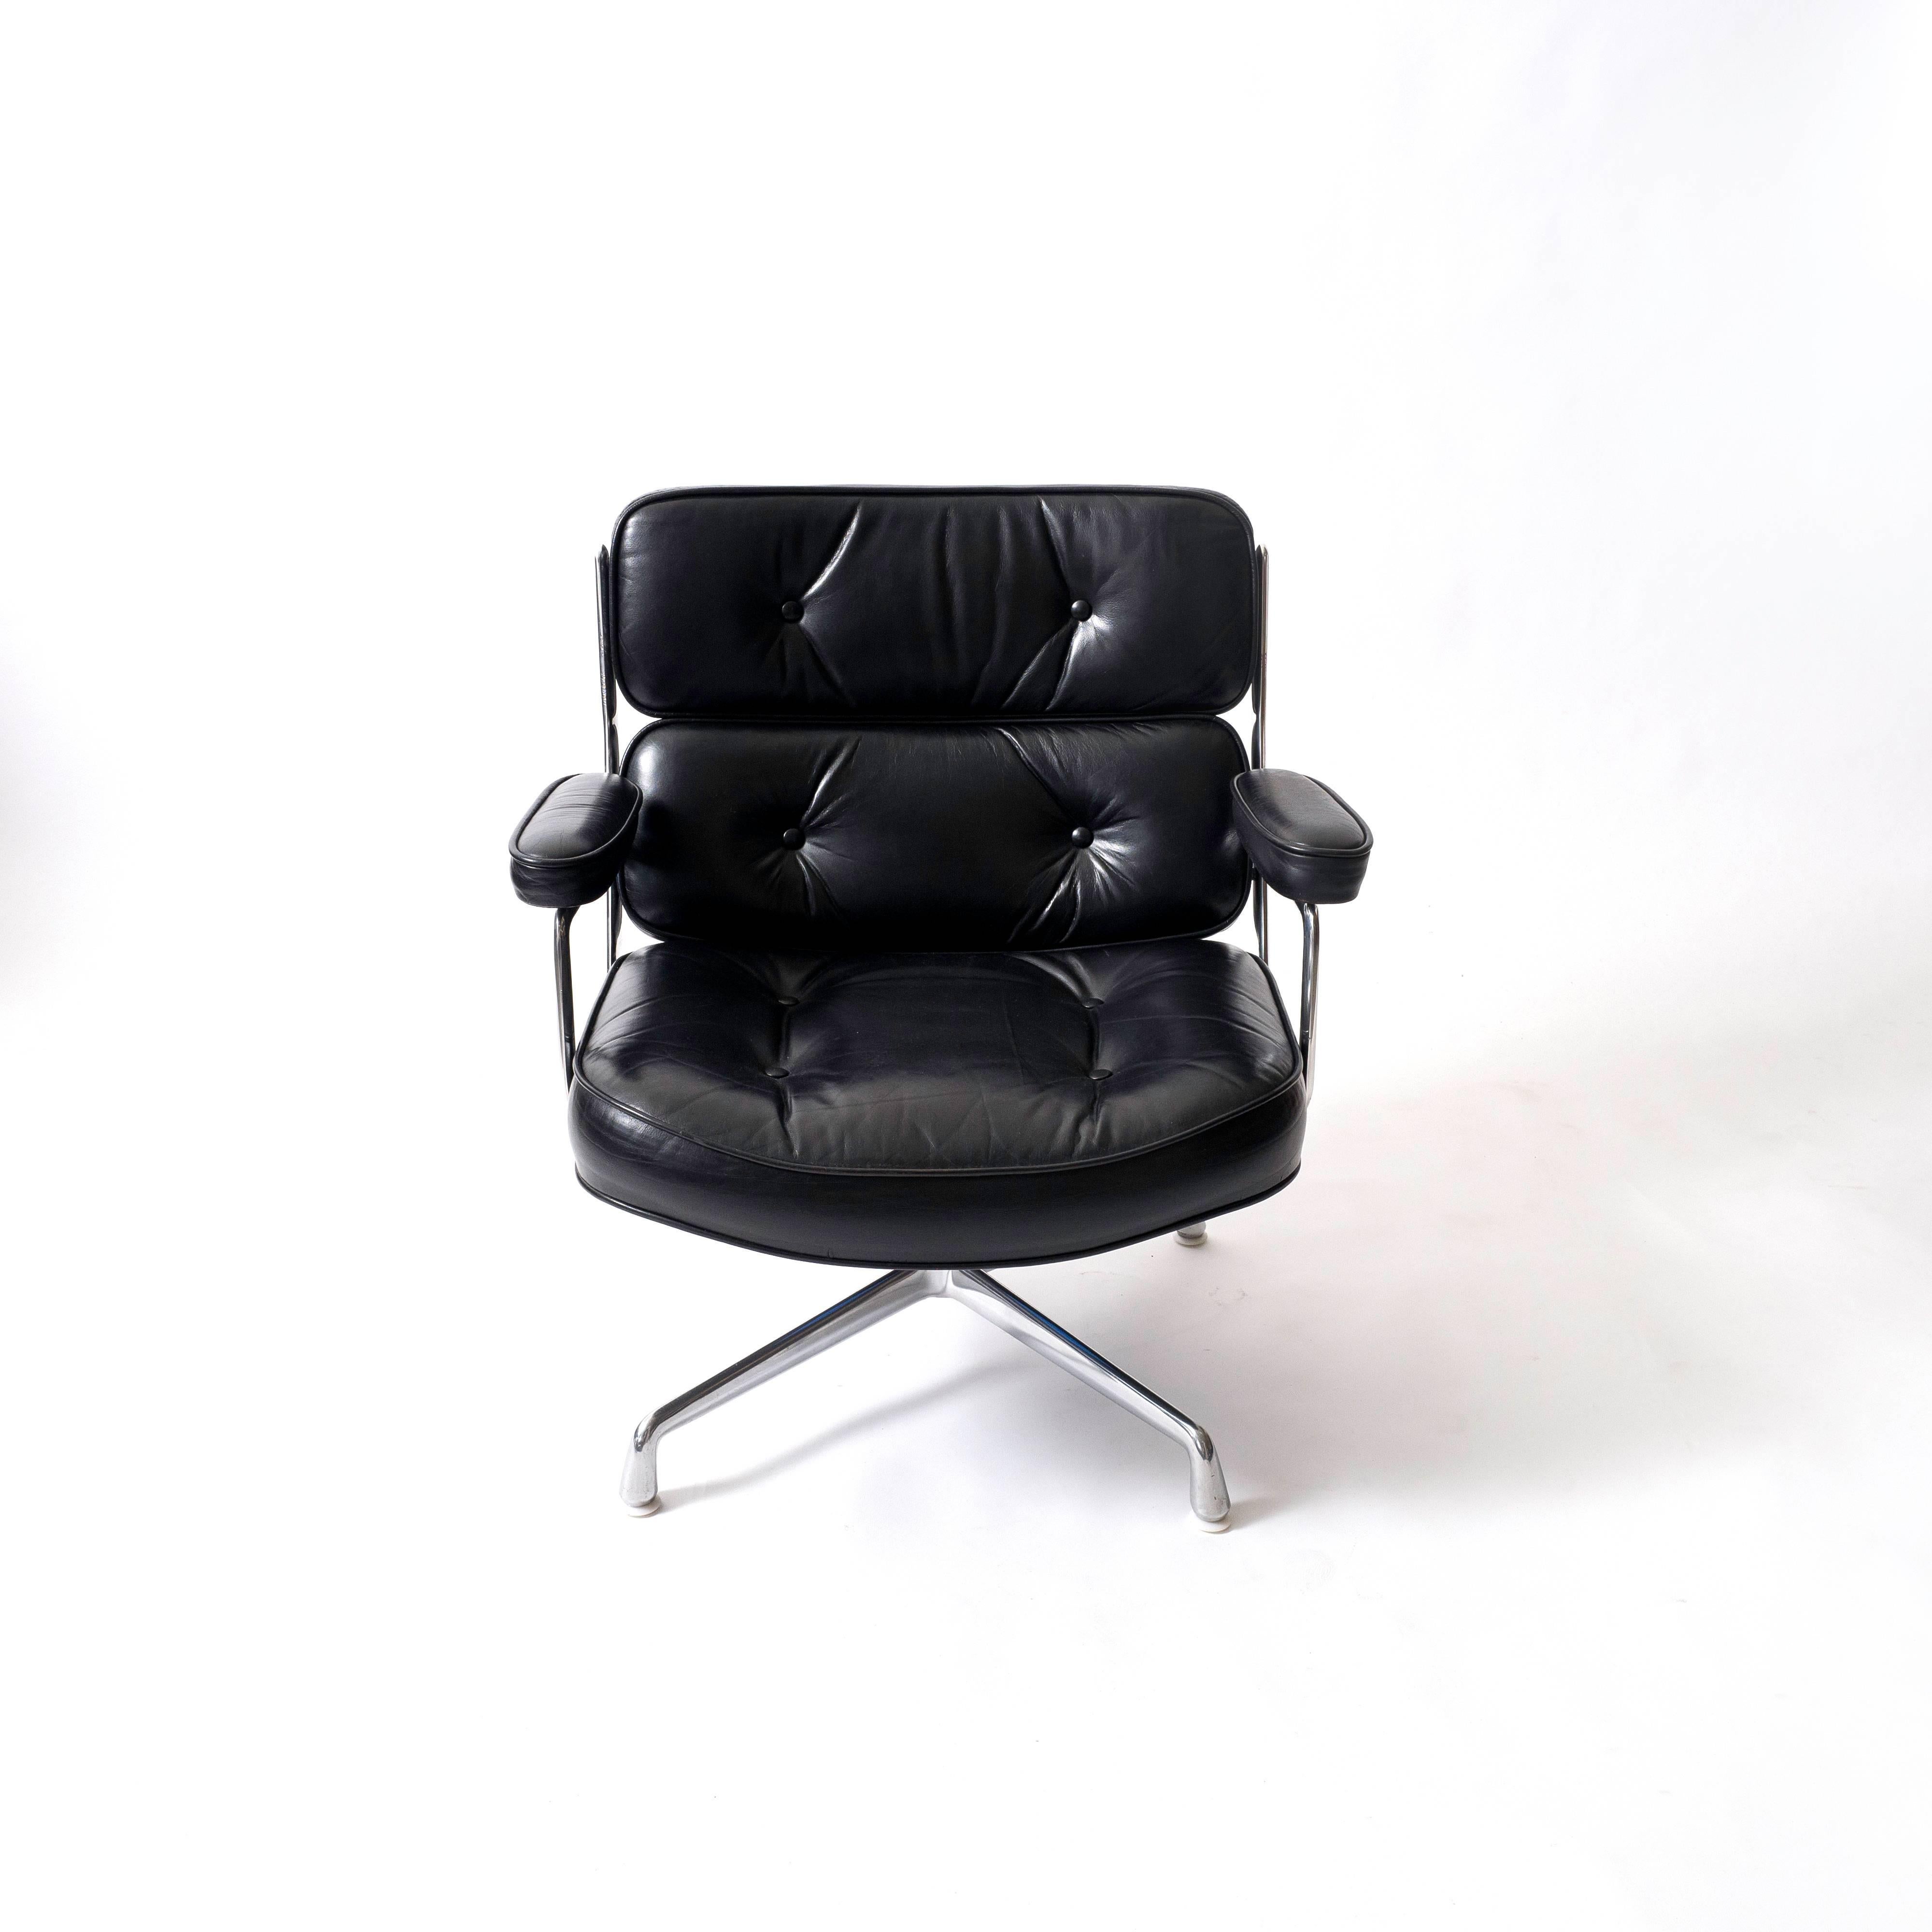 Designed in 1960 by Charles and Ray Eames for the Time Life Building in Manhattan, these chairs feature a polished aluminum frame and sumptuous tufted cushions in the original black leather. The chair sits on four plastic glides. This is the